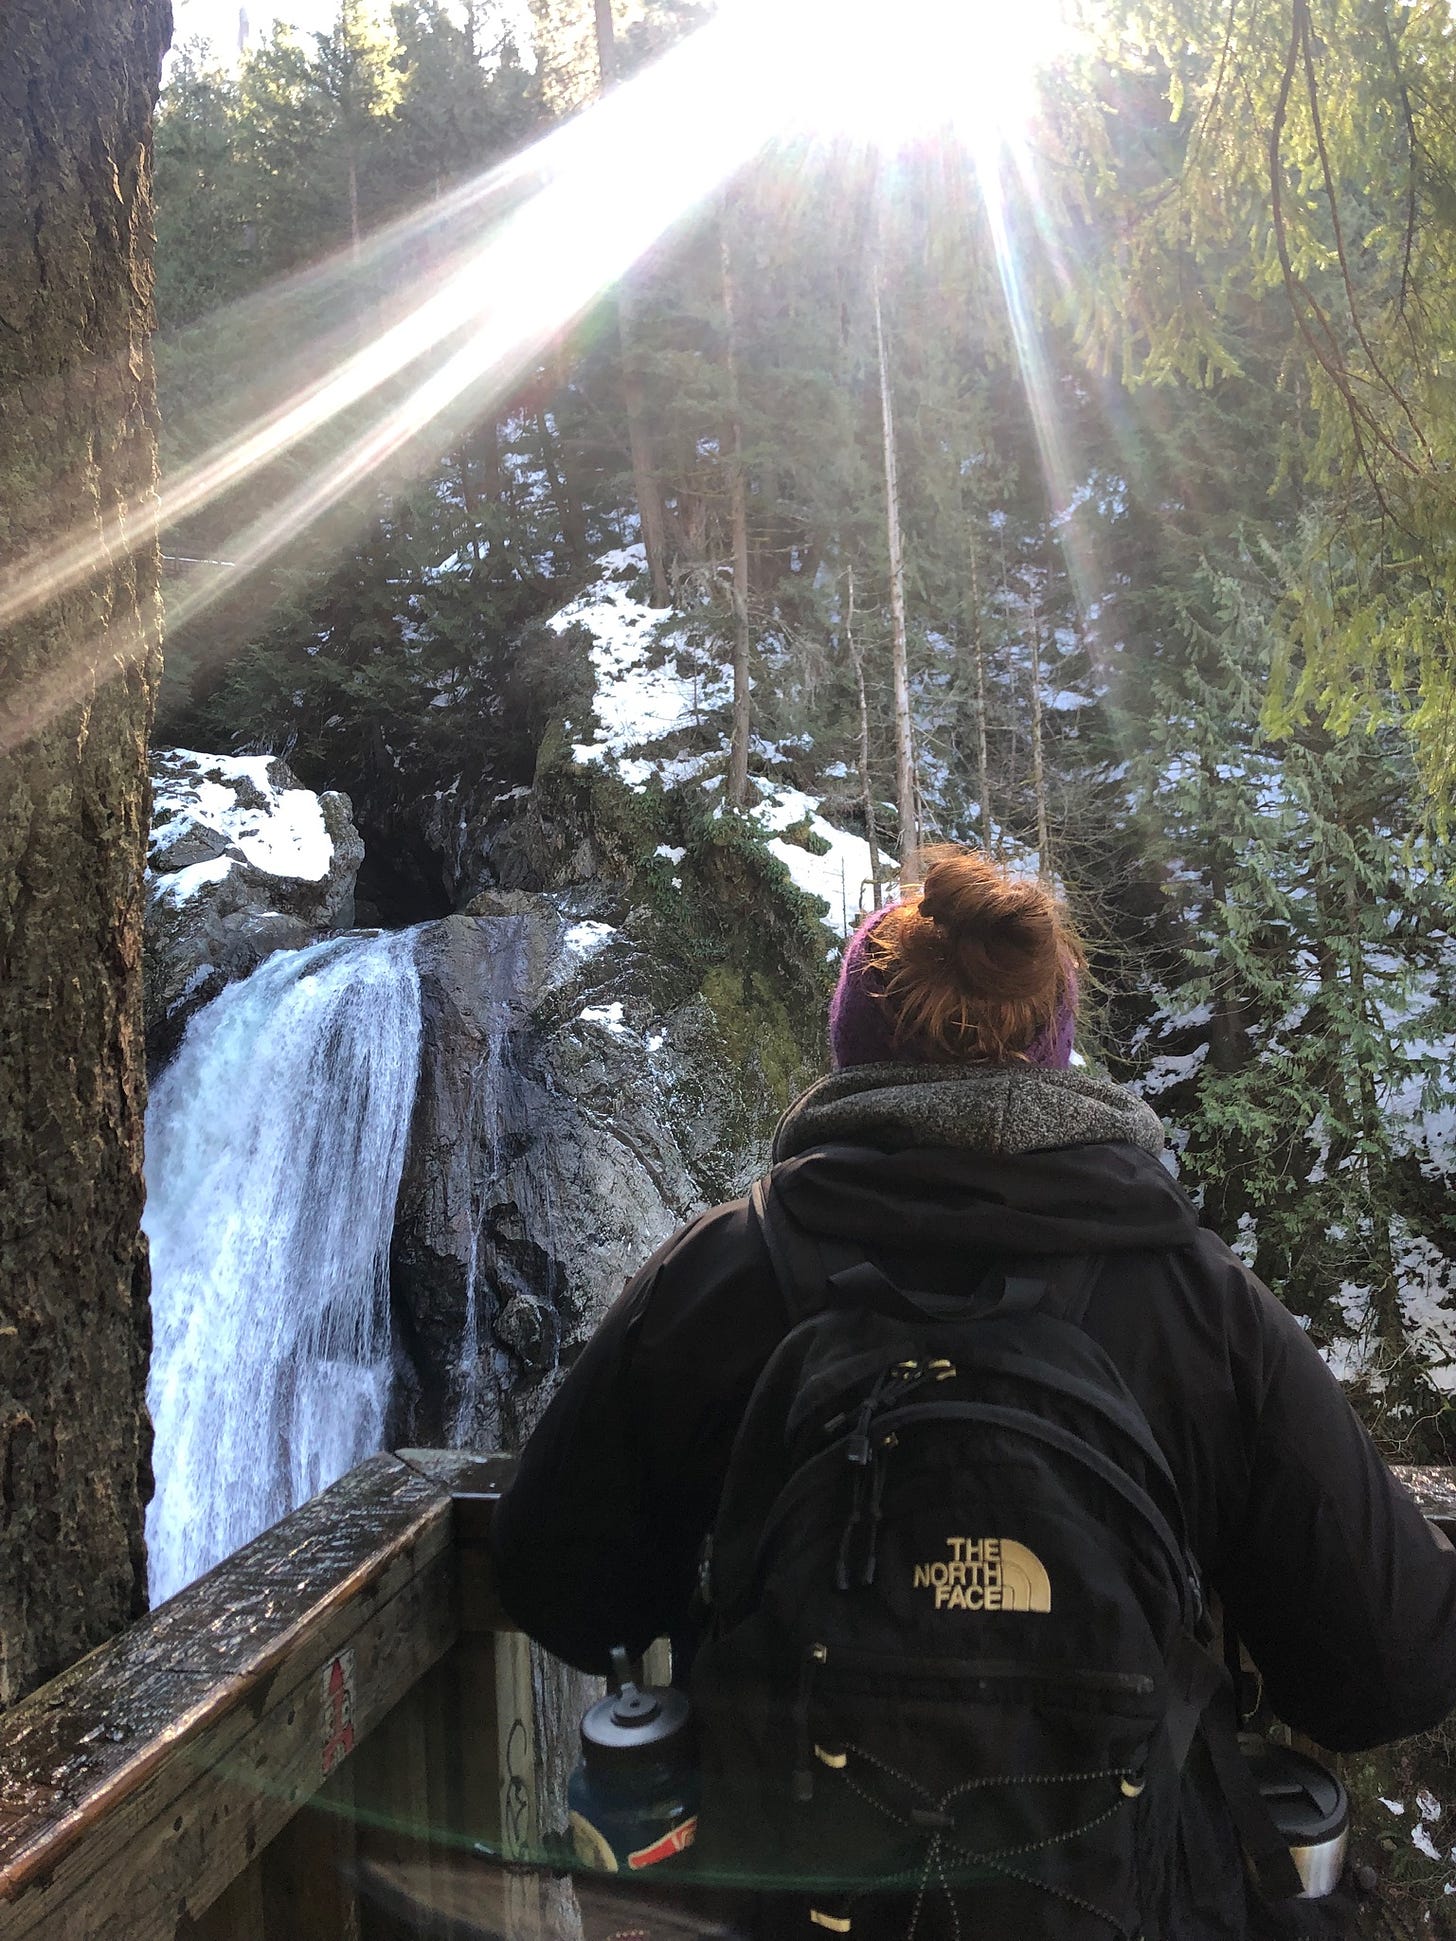 Kate stands with her back to the camera on a snowy trail facing a frozen waterfall while the sun shines through the trees